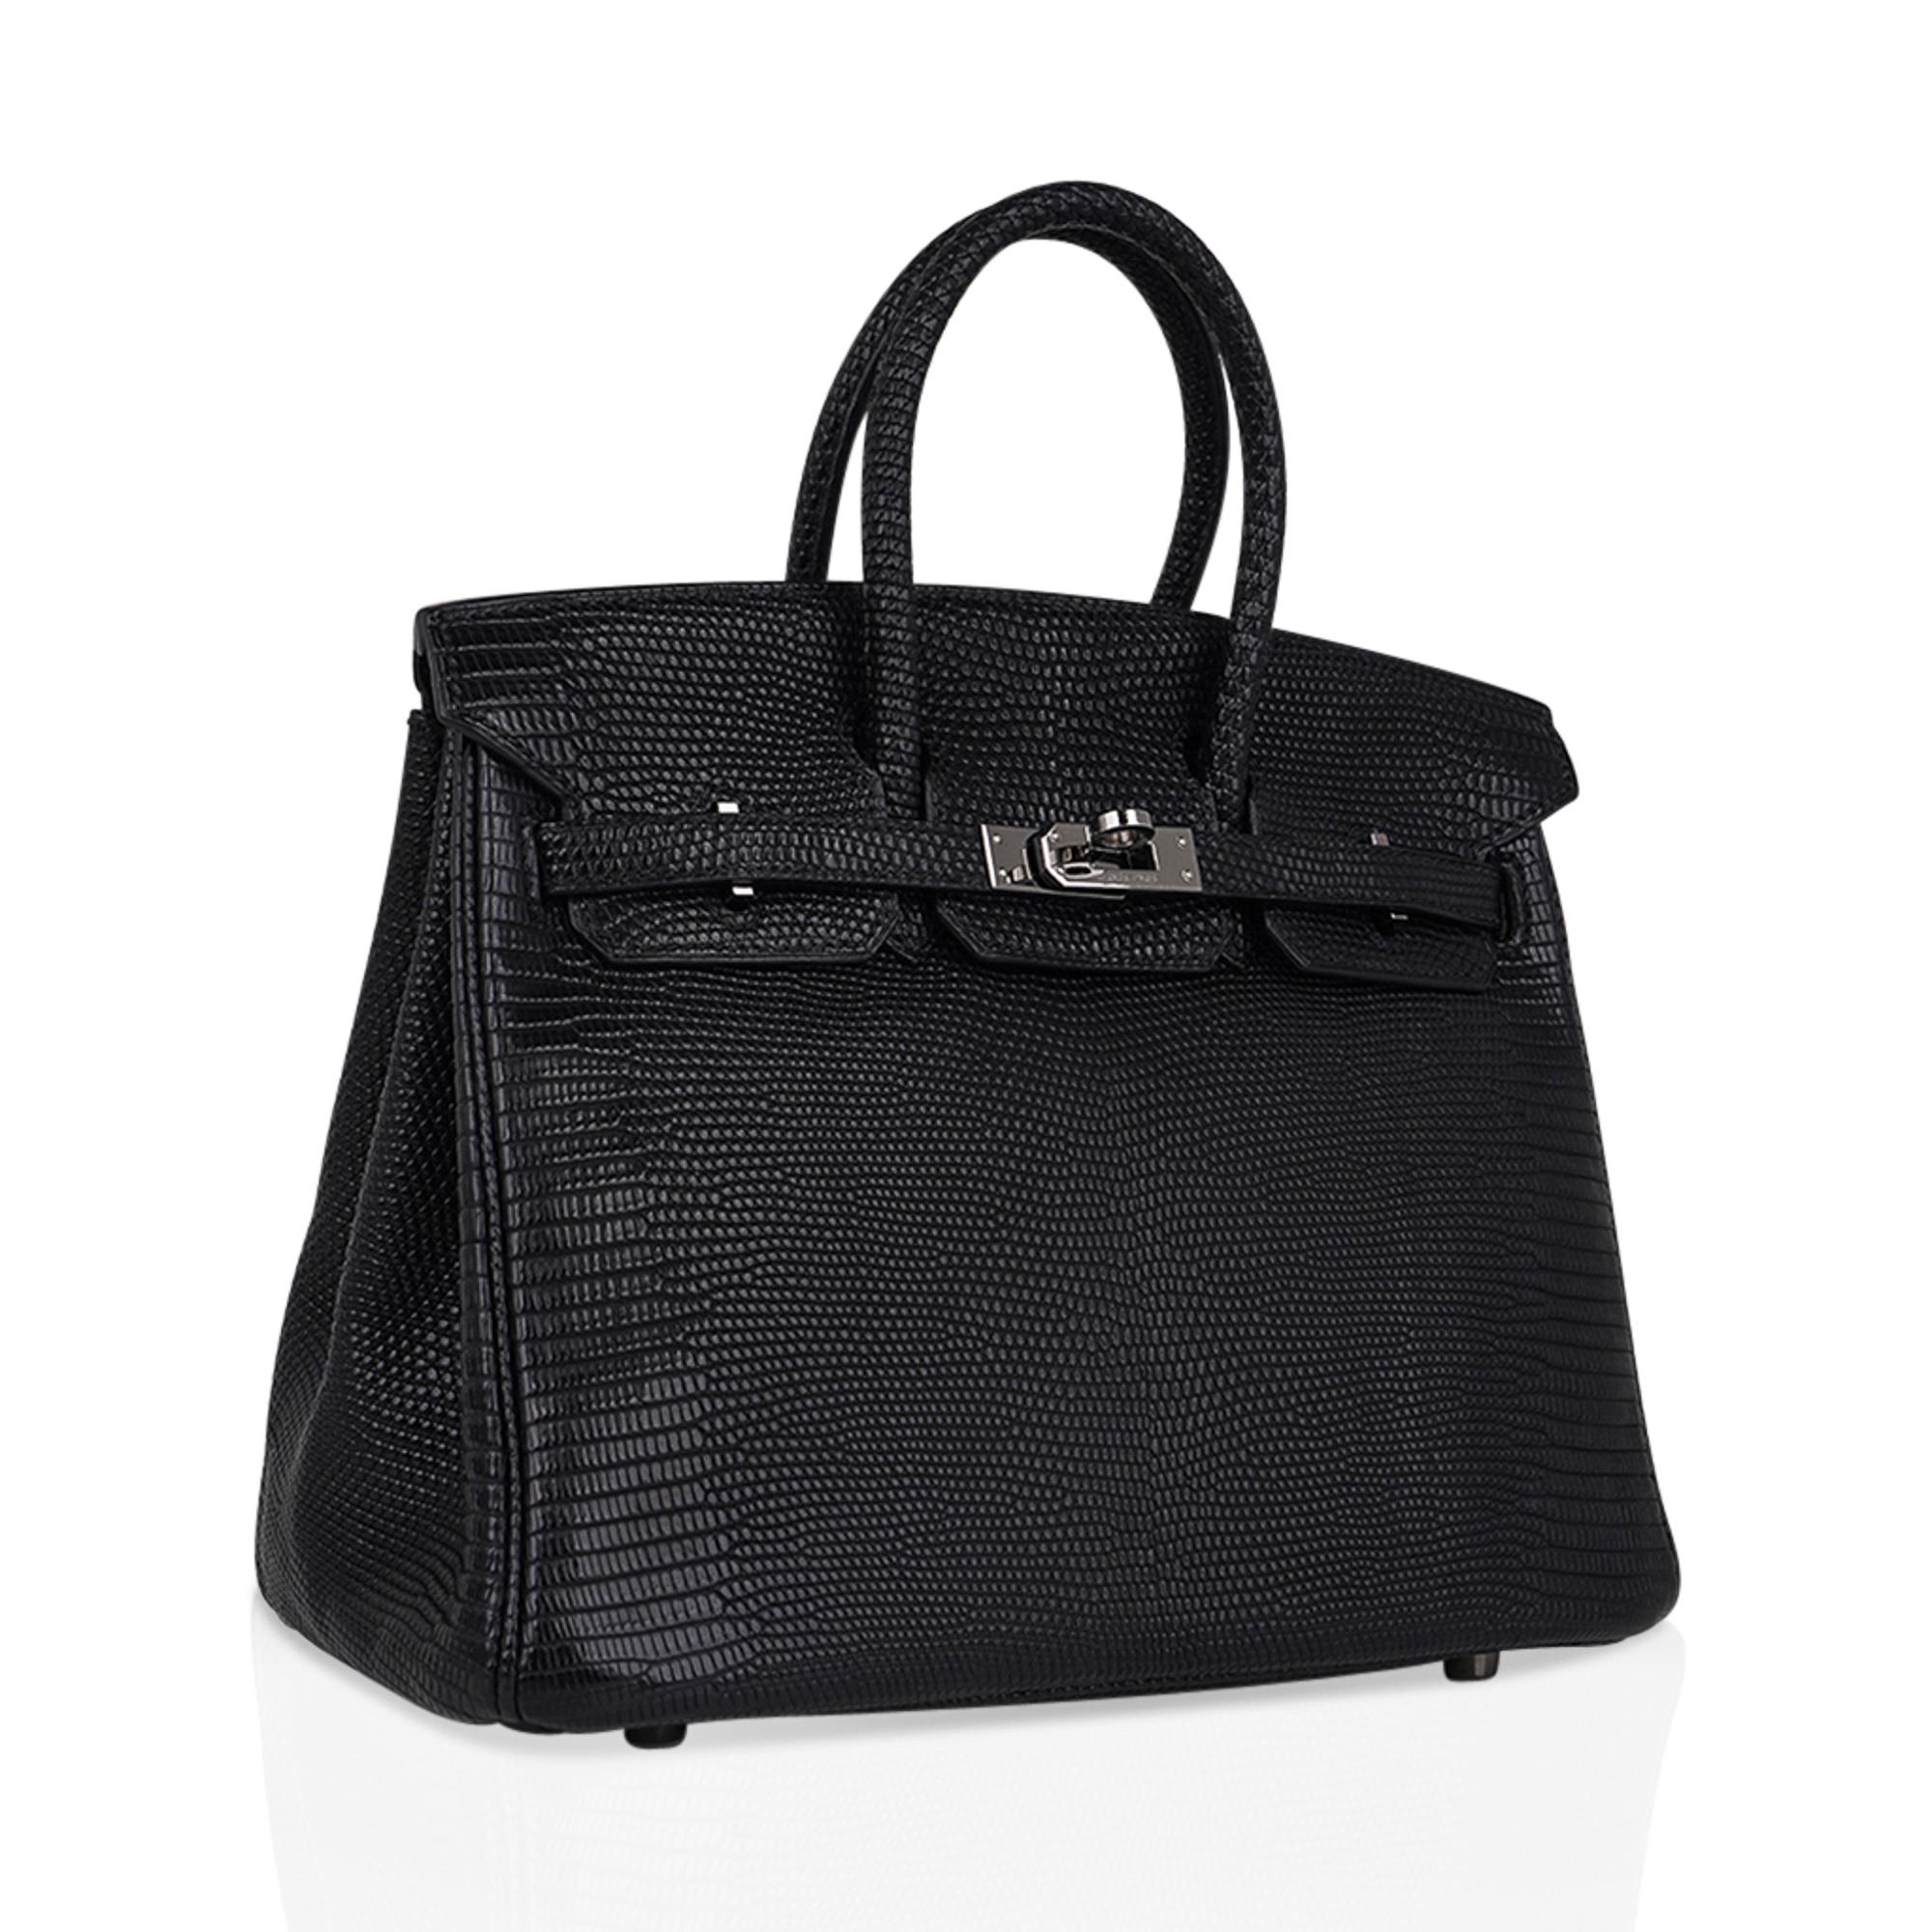 Mightychic offers an Hermes Birkin 25 bag featured in Matte Black Varanus Salvator Lizard.
This extremely rare Hermes Birkin bag is elegant, timeless and absolutely stunning.
Accentuated with Palladium hardware.
Very faint marks on the hardware -